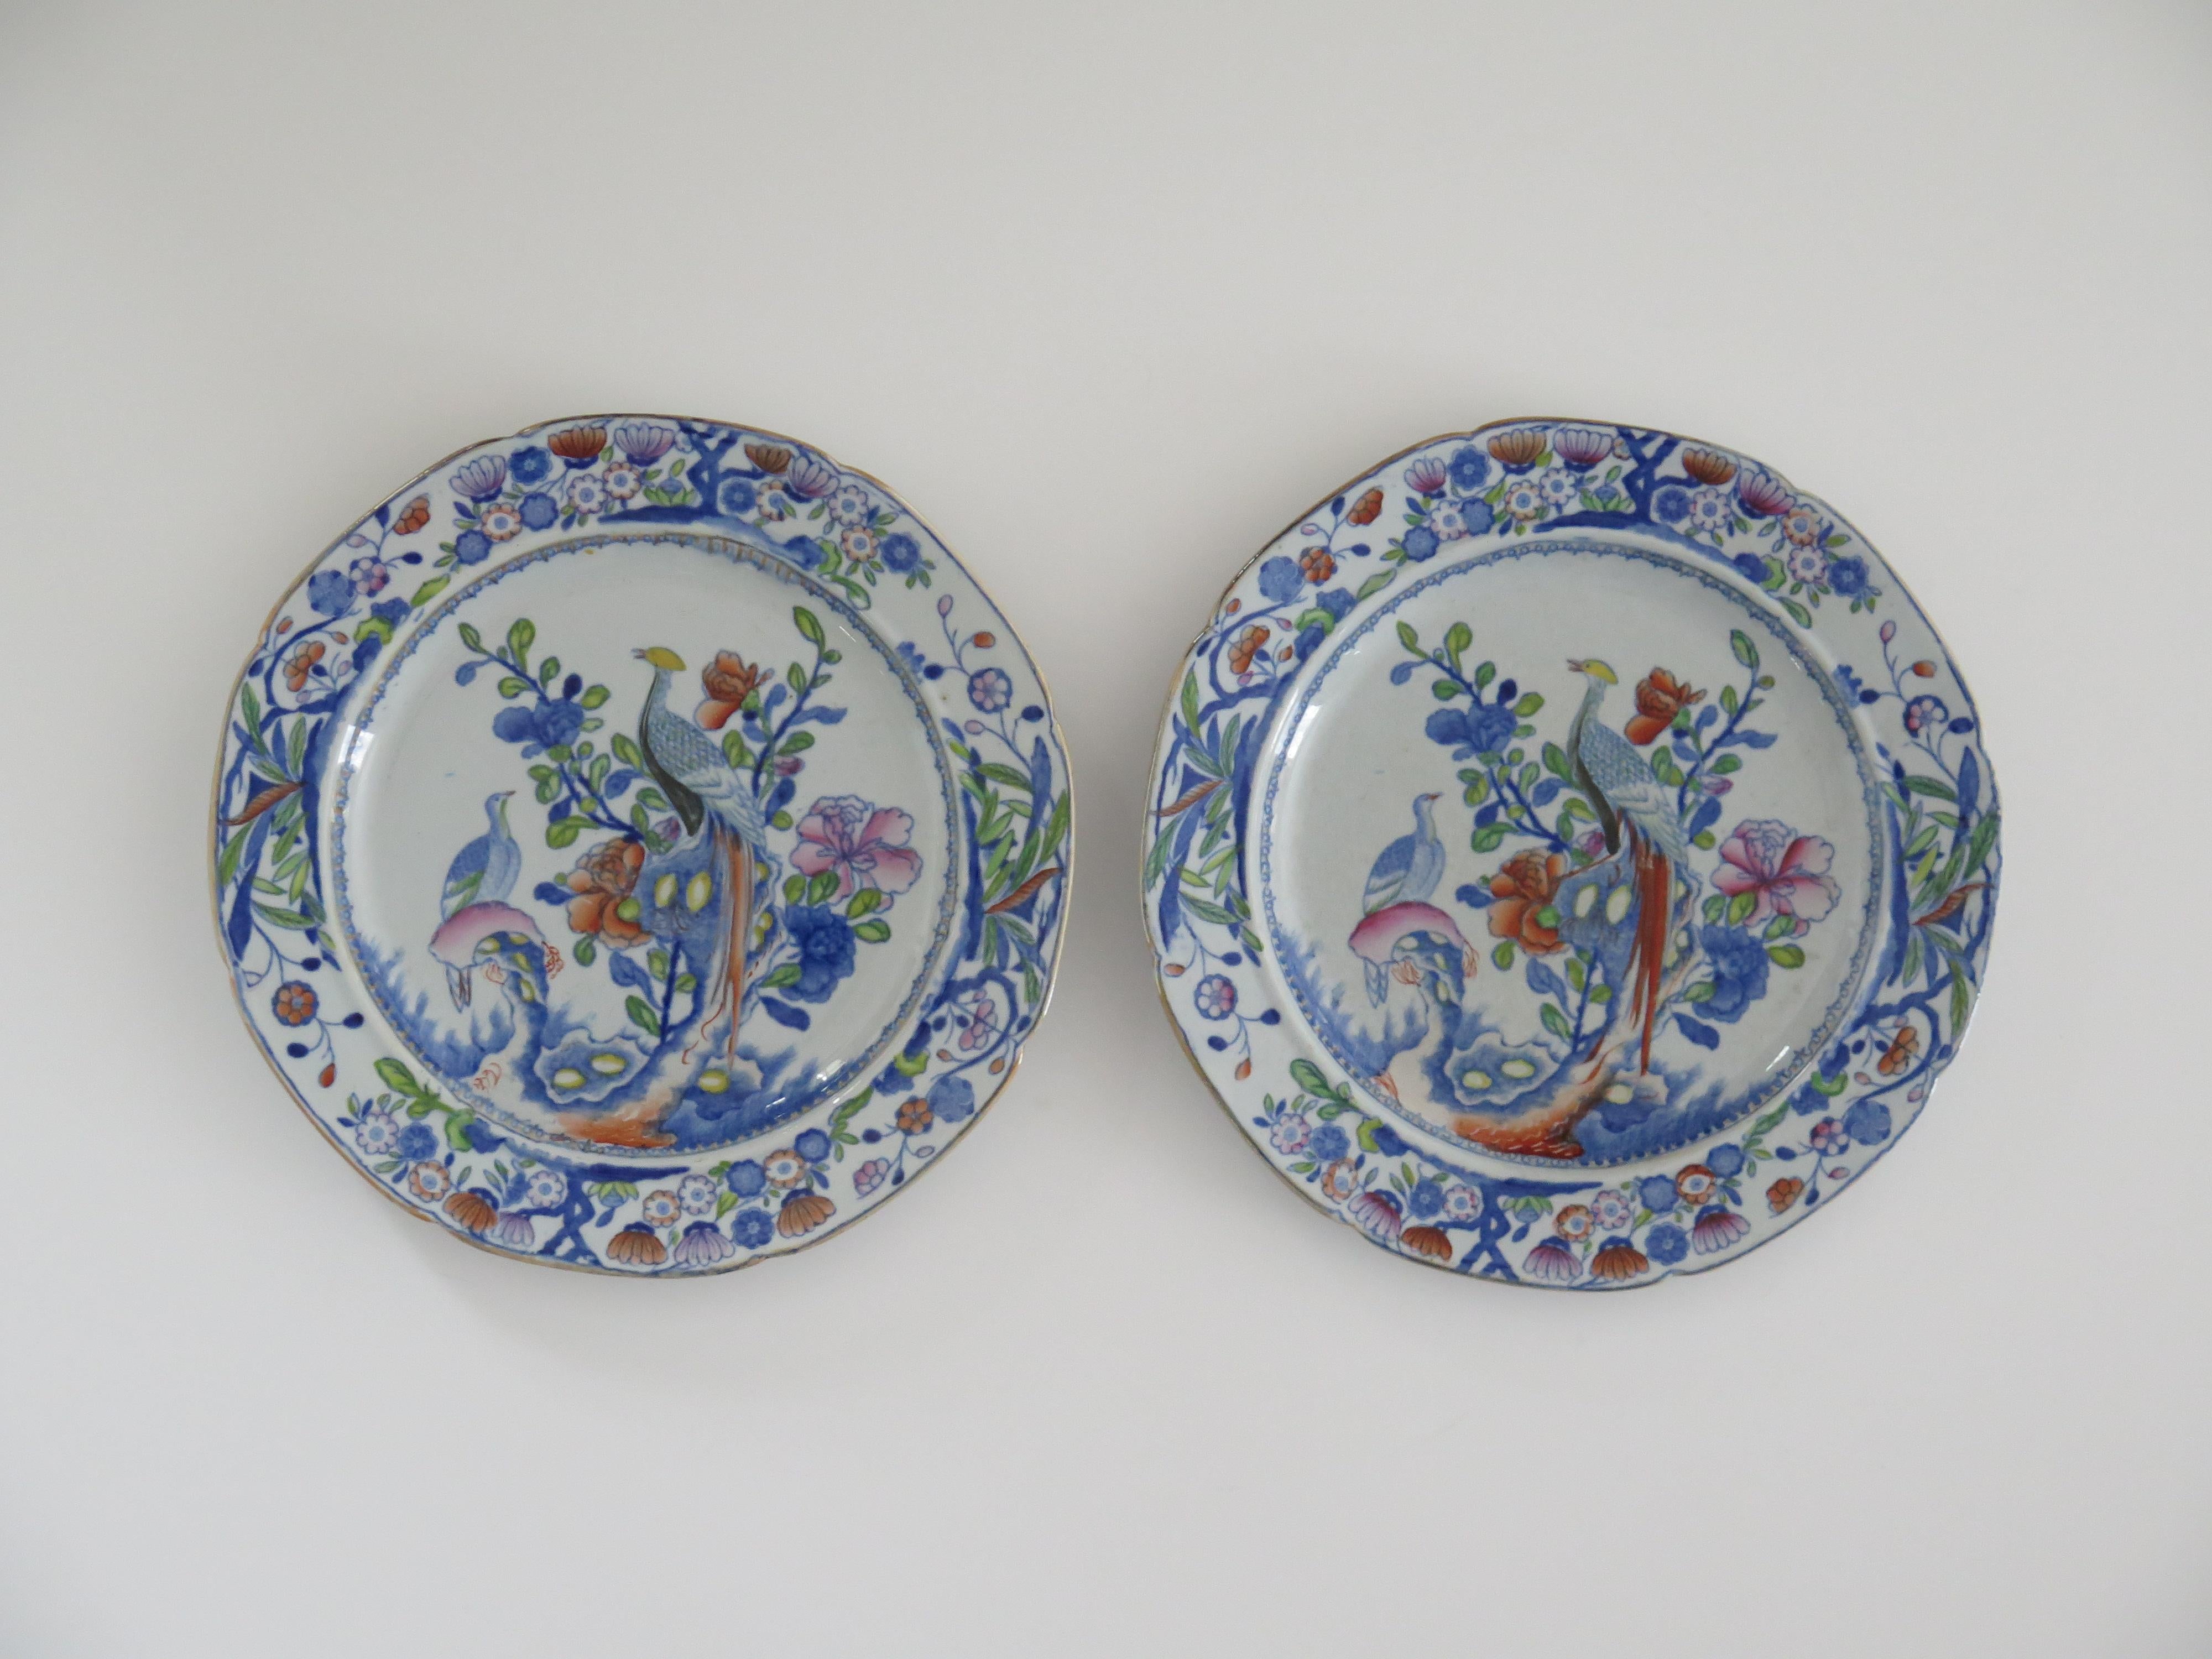 This is a very decorative PAIR of Side Plates by Mason's Ironstone, Lane Delph, England in the Oriental Pheasant pattern, dating to the early period of Mason's ironstone, circa 1818.

Both plates are circular in shape with a notched rim and